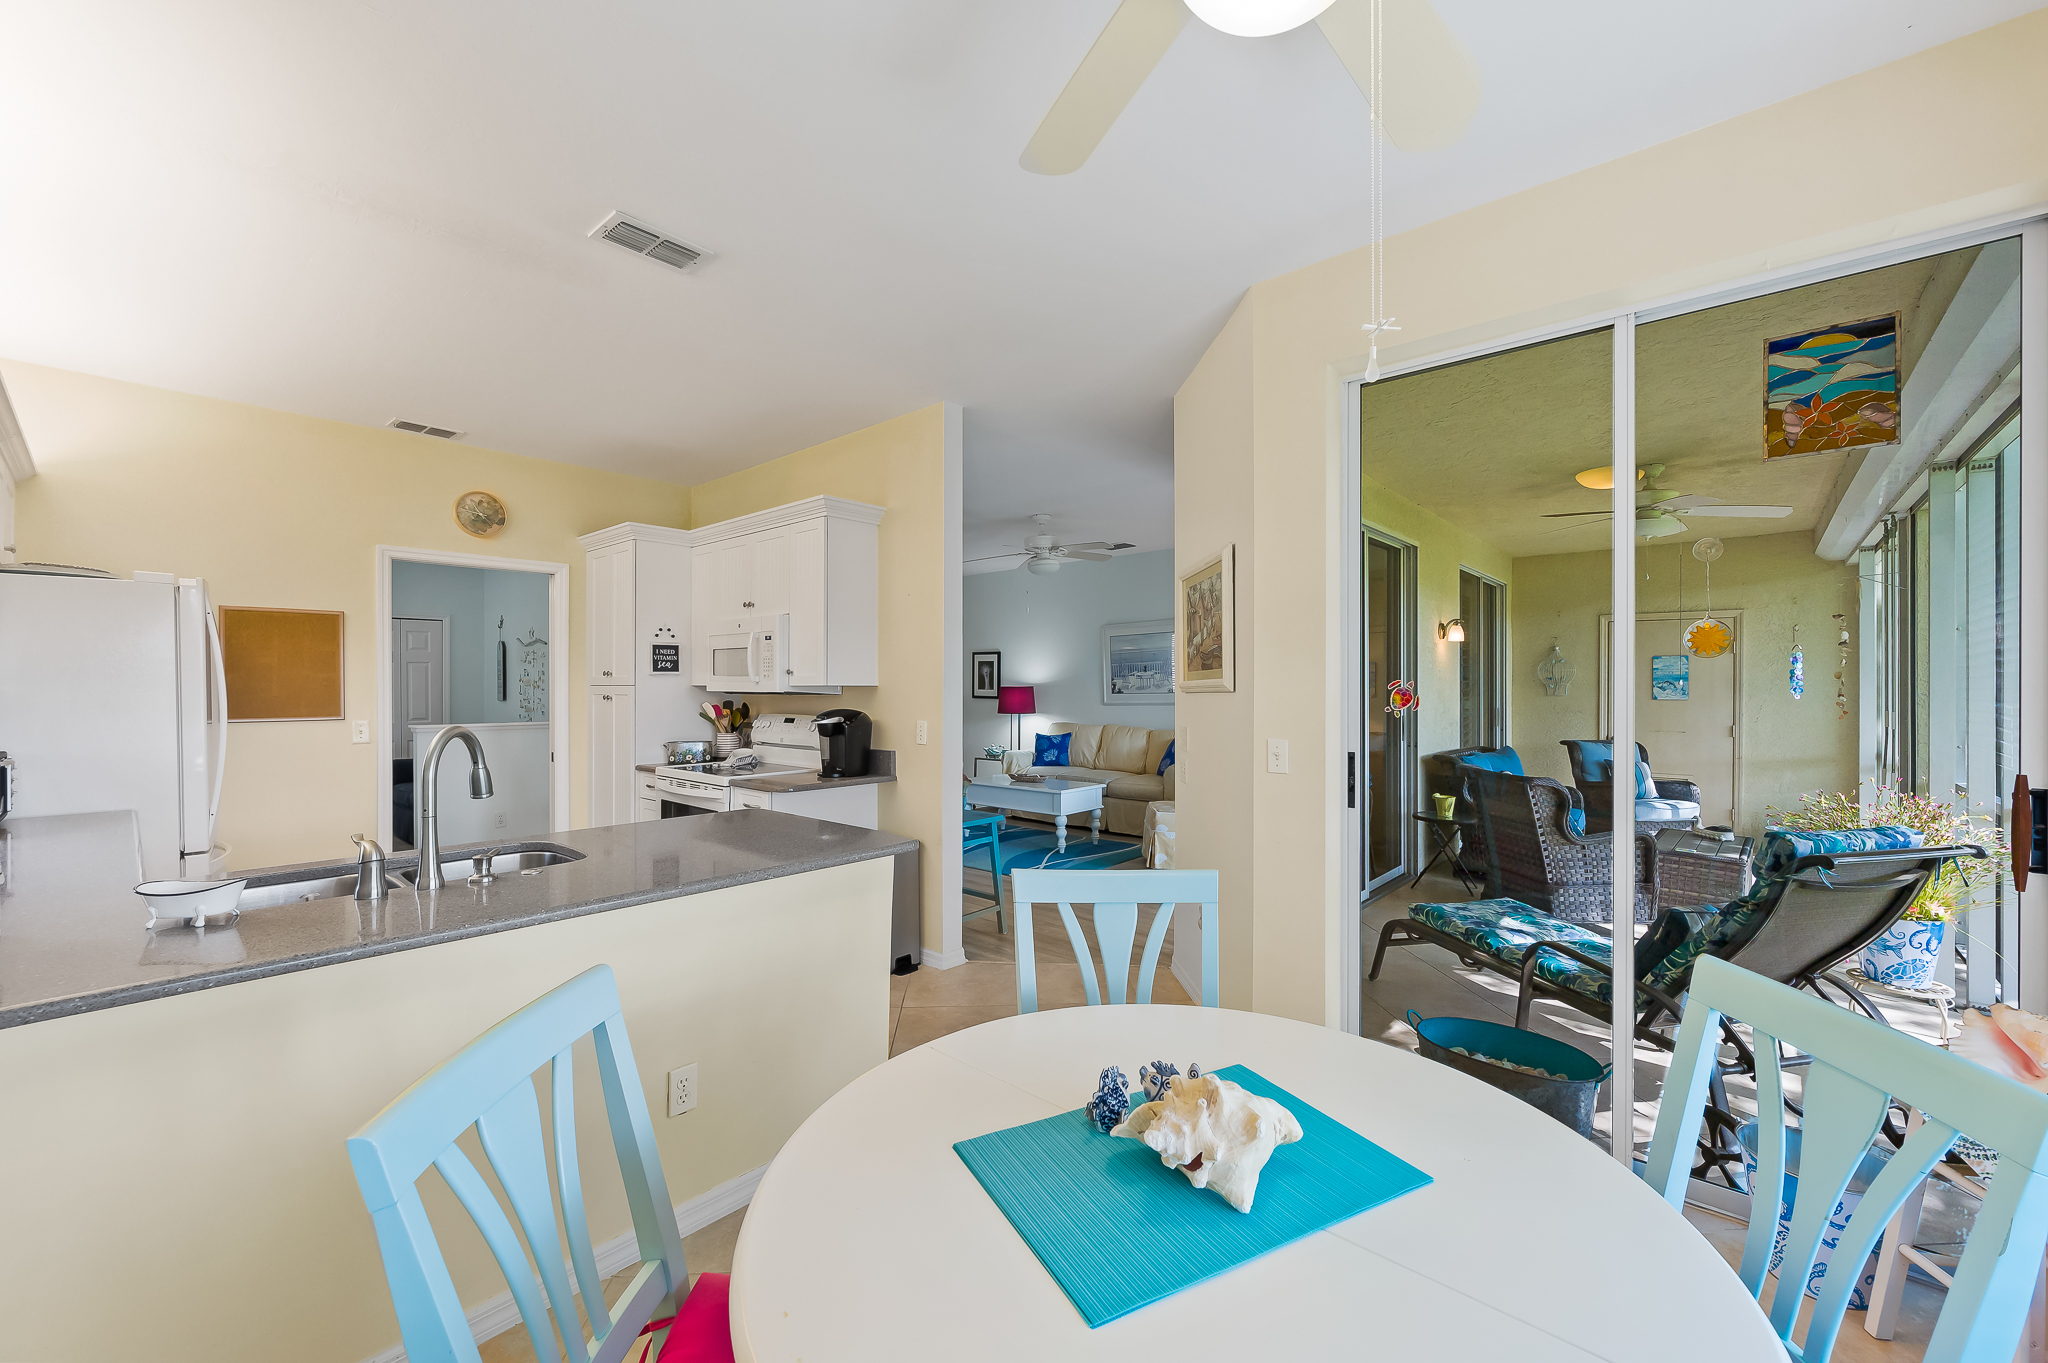 Dine-in kitchen with lanai access.